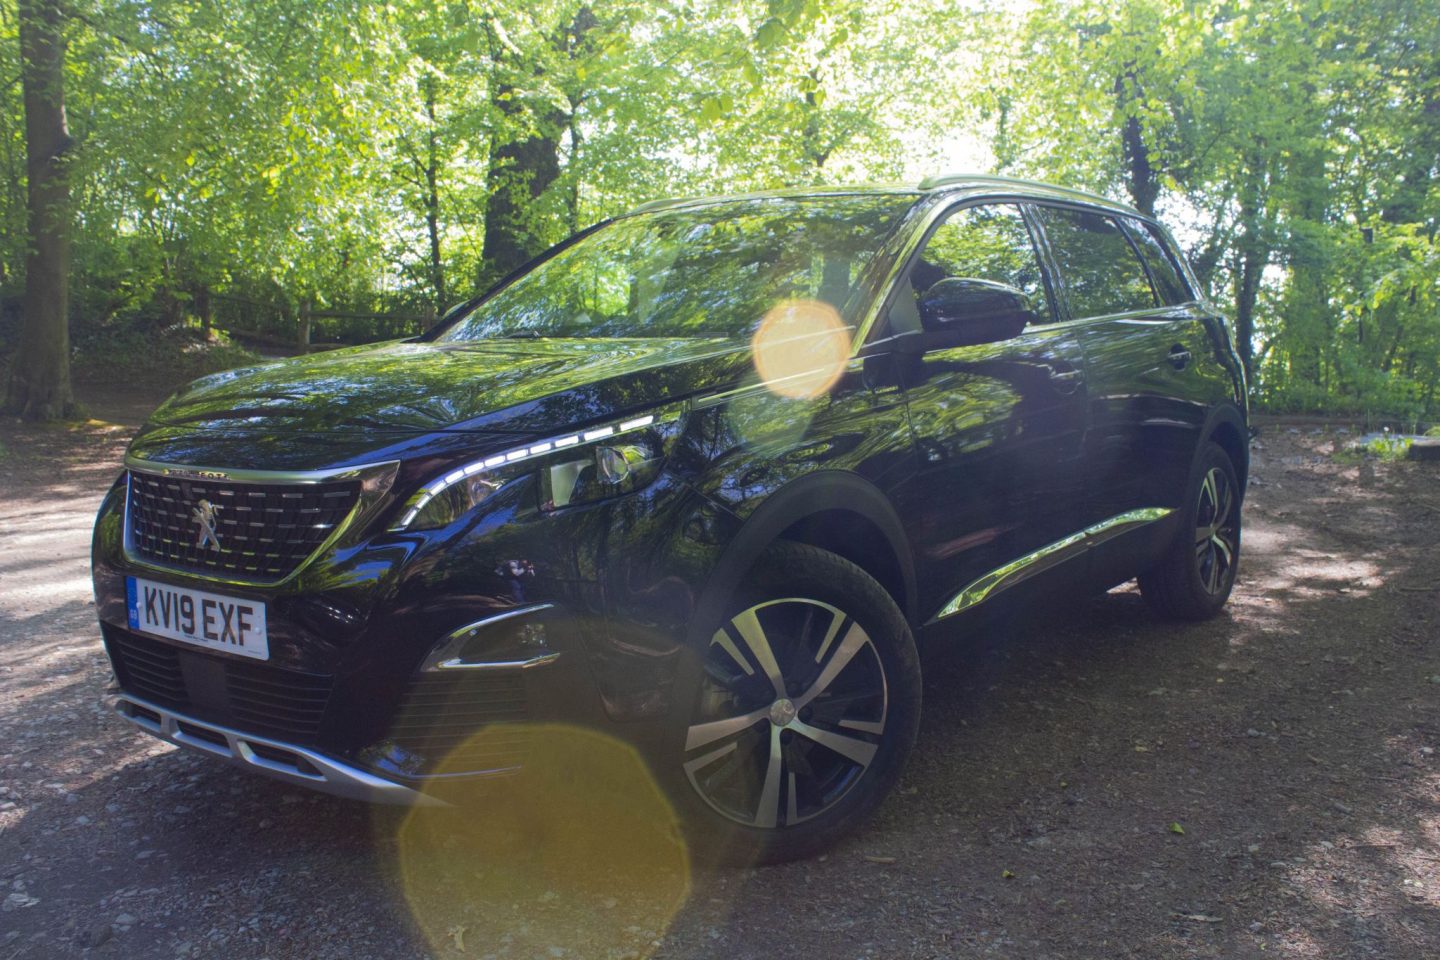 Peugeot 5008, Peugeot 5008 SUV, Peugeot 5008 review, Peugeot 5008 test drive, COTY, Car of The Year Awards